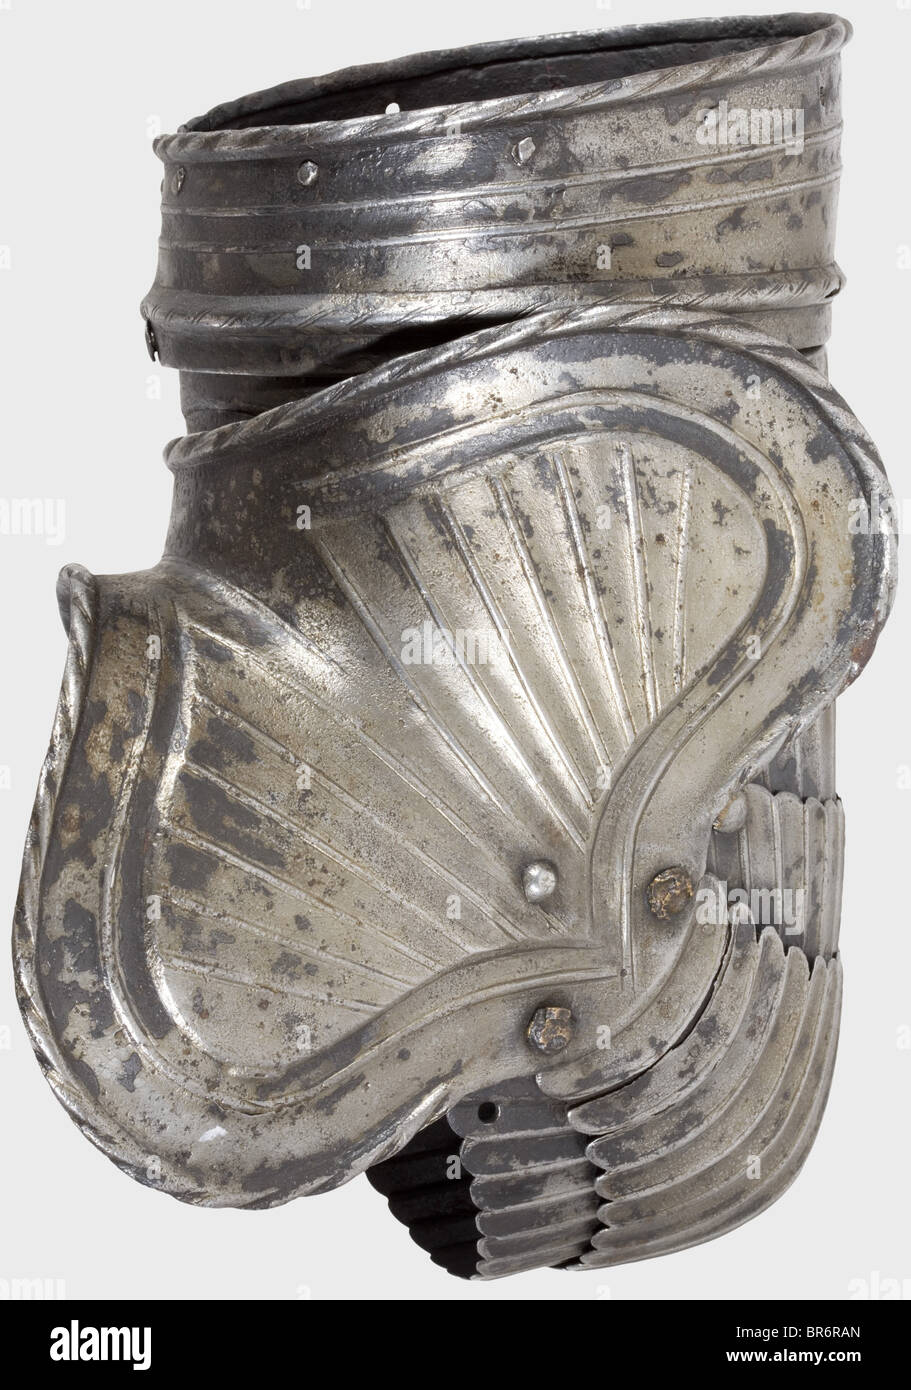 Arm defences of a Maximilian armour, Germany, circa 1520. Fragment of a left arm defence consisting of a complete rerebrace and a large couter. Matching pieces with fine fluting. Damaged by fire. Ridges partially ground through. Length 27 cm. historic, historical, 16th century, defensive arms, weapons, arms, weapon, arm, fighting device, object, objects, stills, clipping, clippings, cut out, cut-out, cut-outs, utensil, piece of equipment, utensils, plating, armour-plating, armour, armor, reactive armour, armour suit, armor suit, metal, Stock Photo